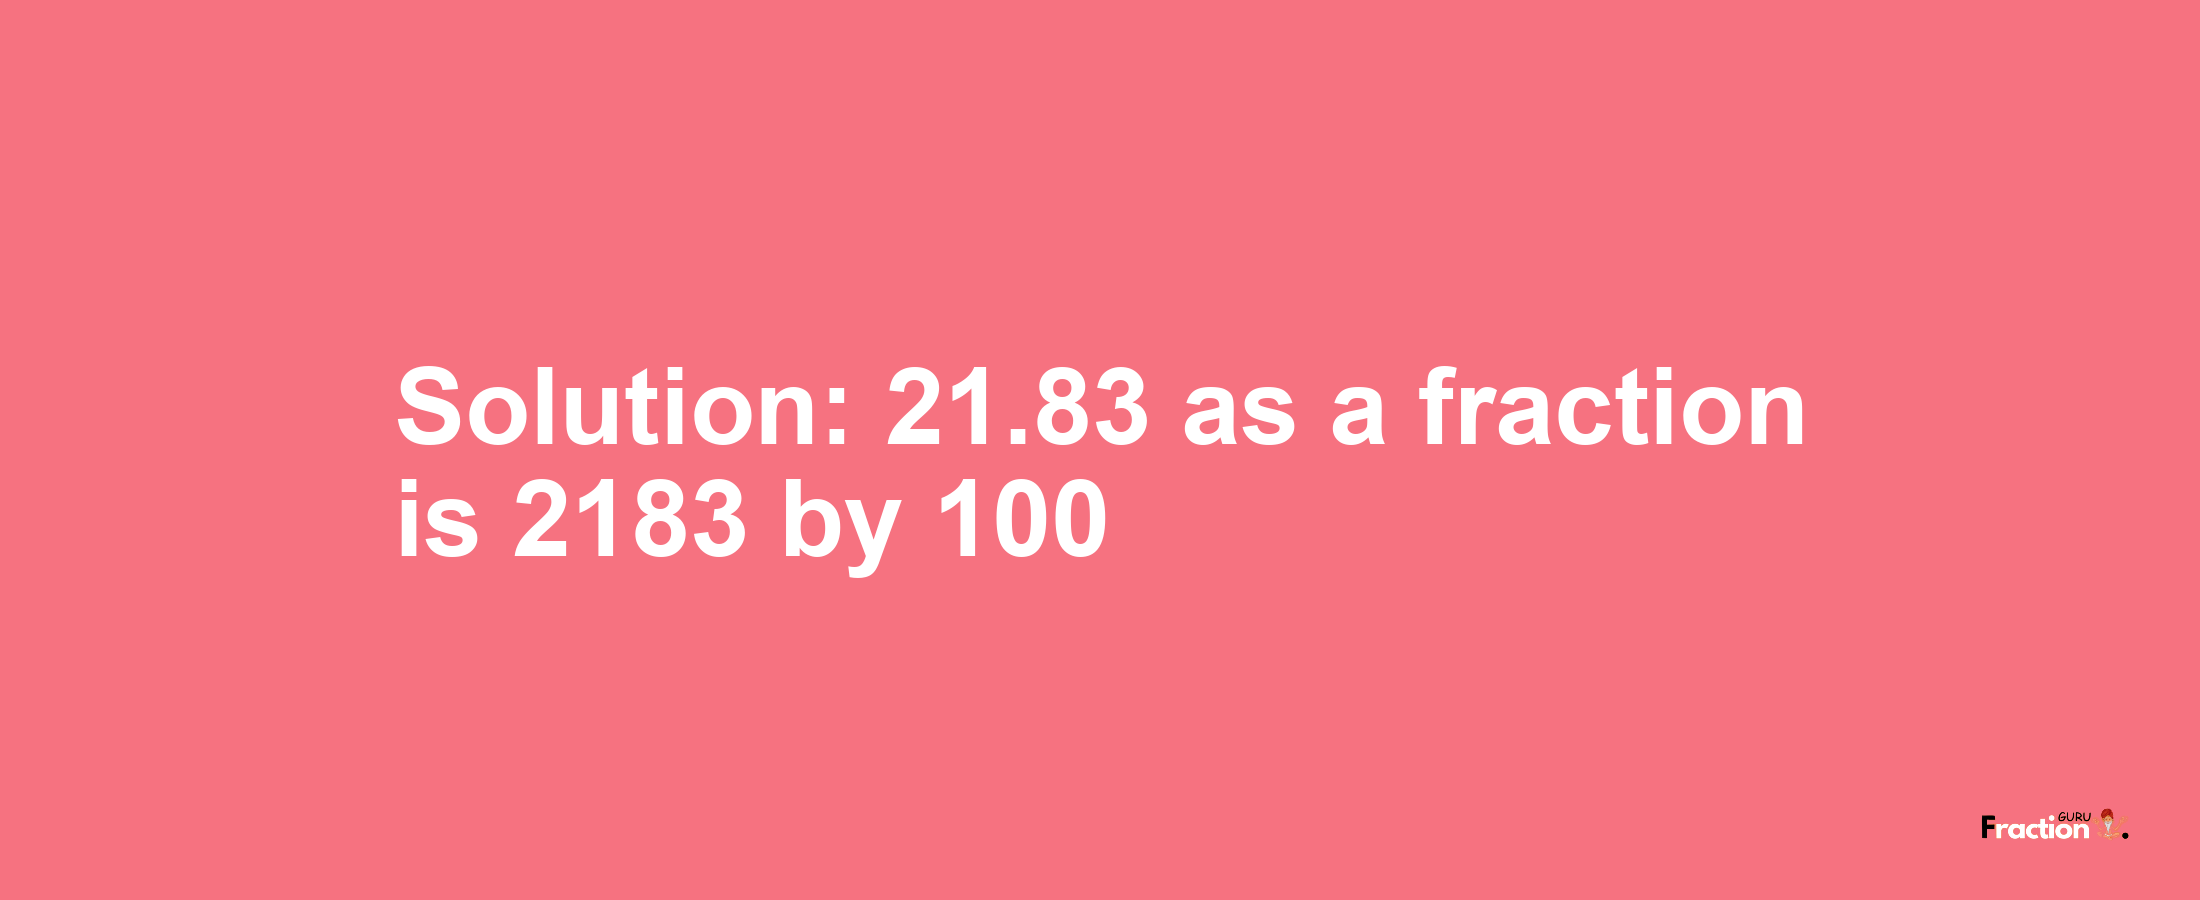 Solution:21.83 as a fraction is 2183/100